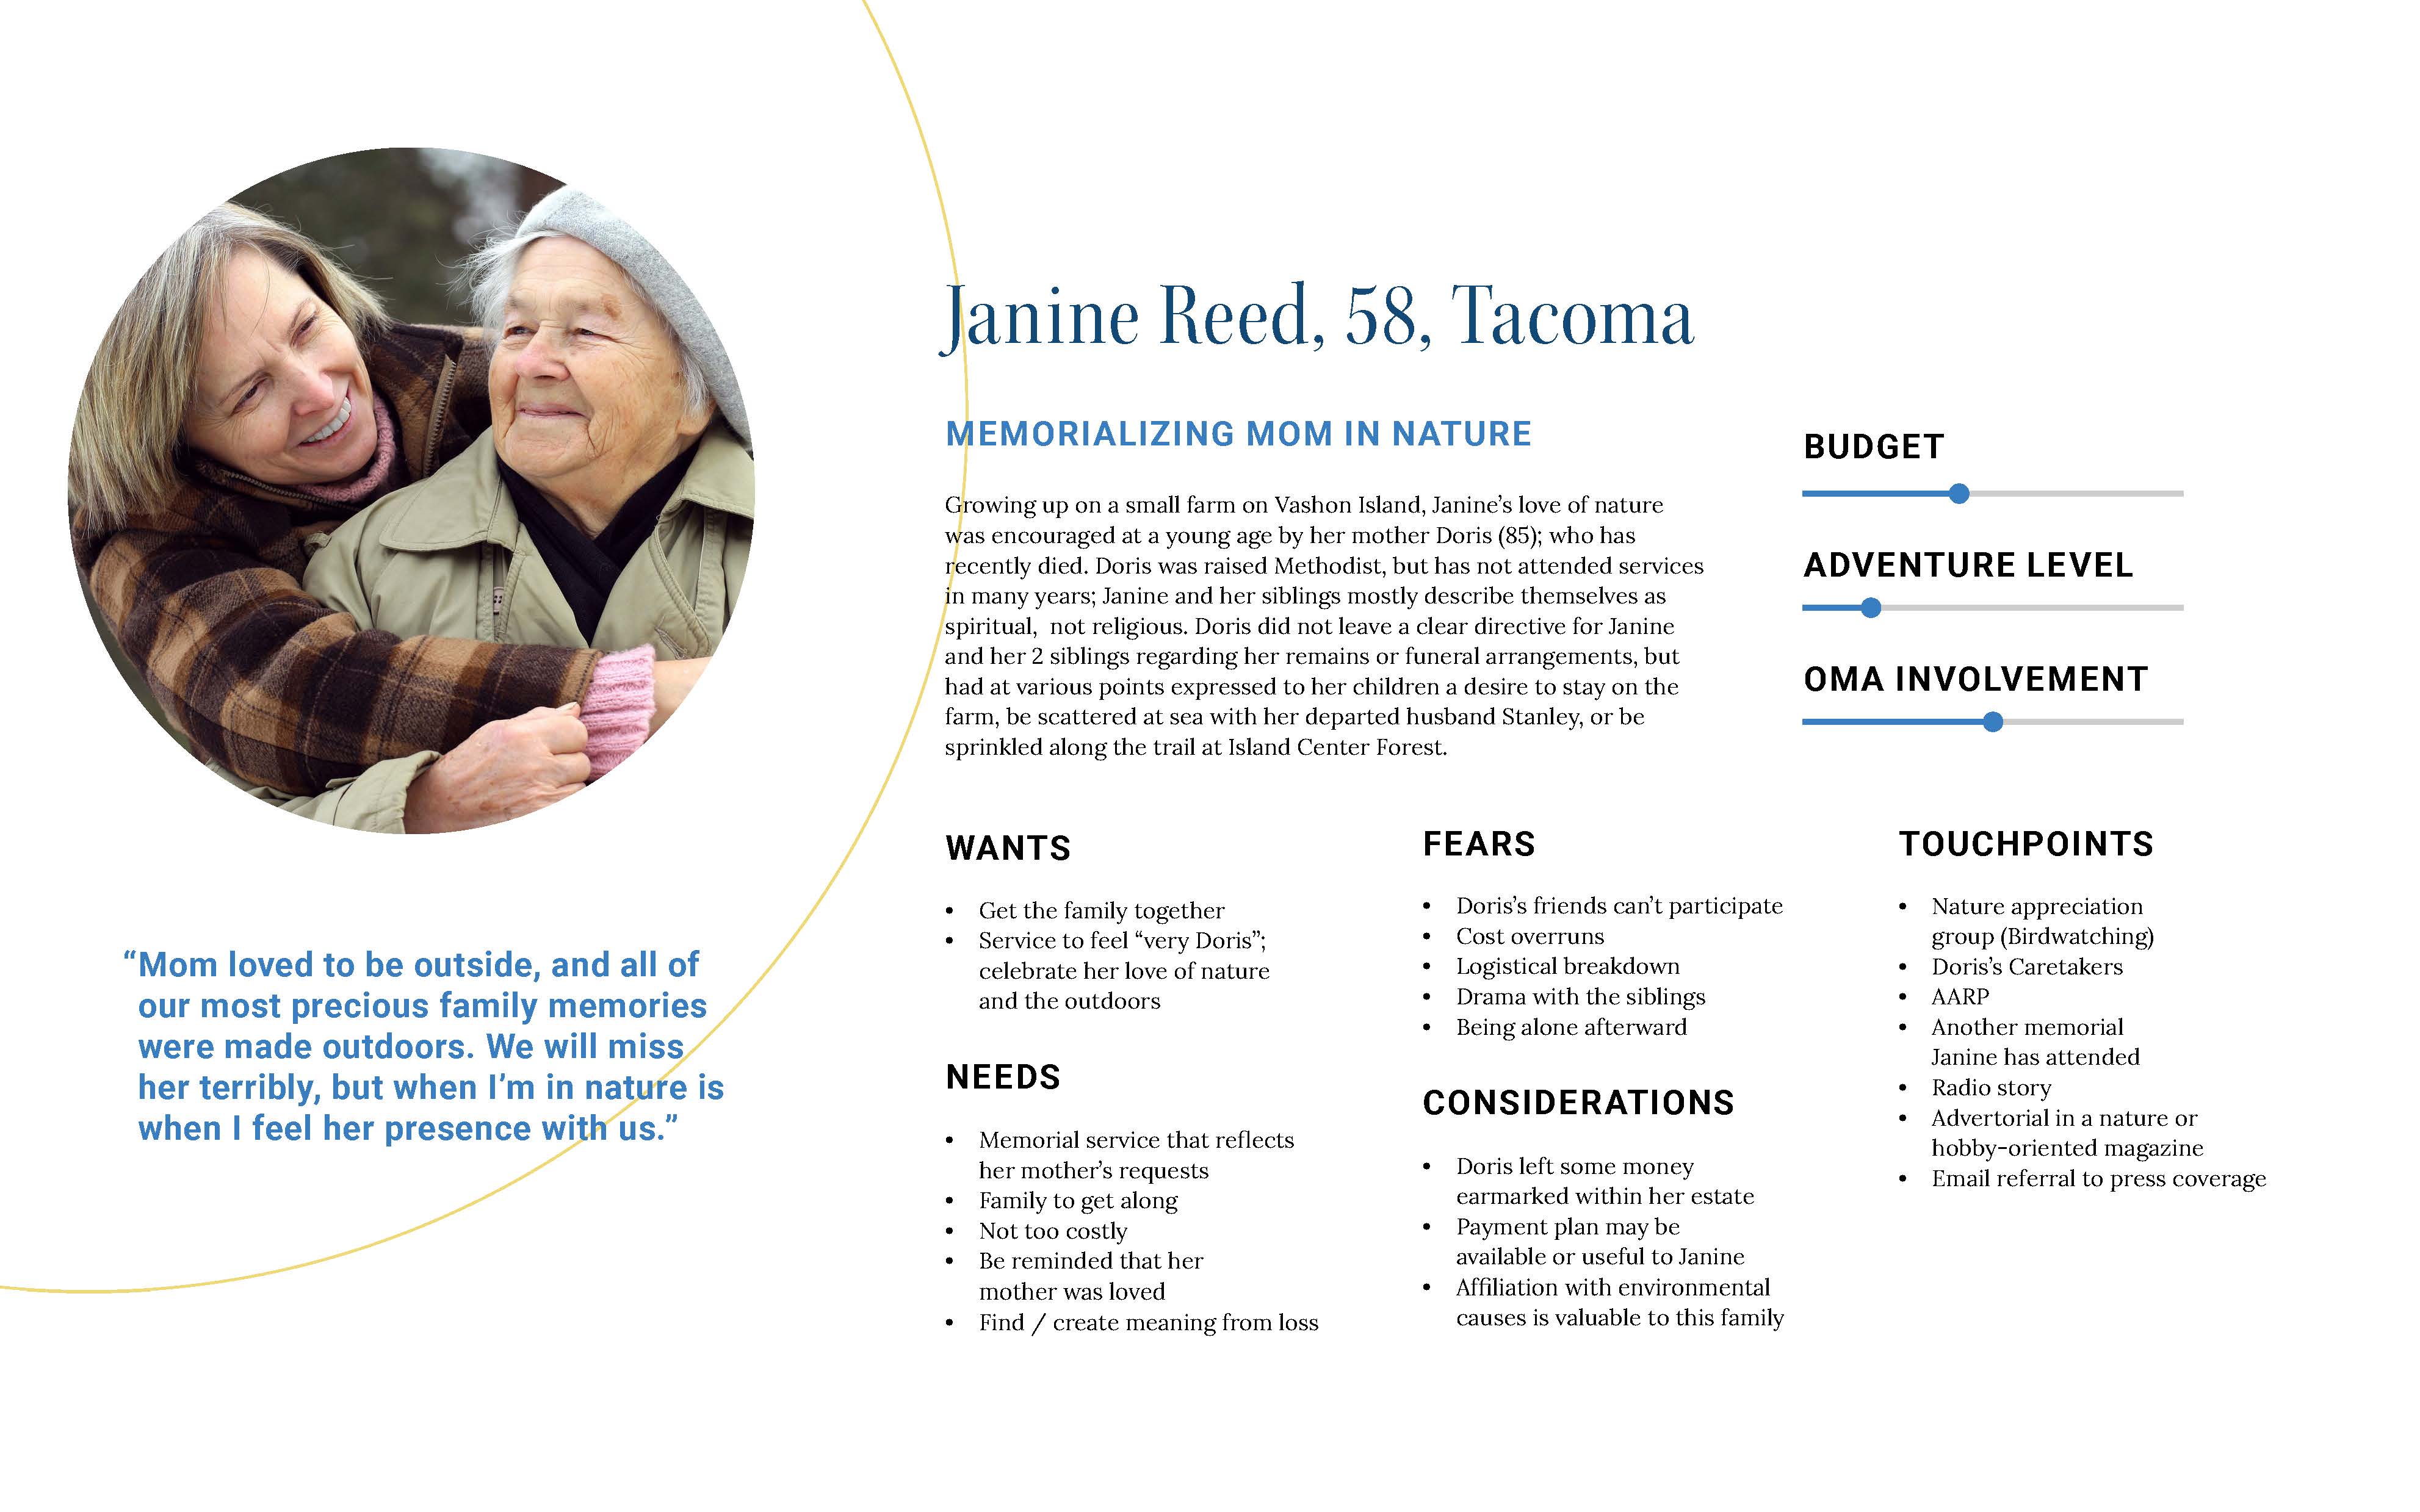 Persona profile for Janine Reed; seeking to celebrate her mother's life in nature.